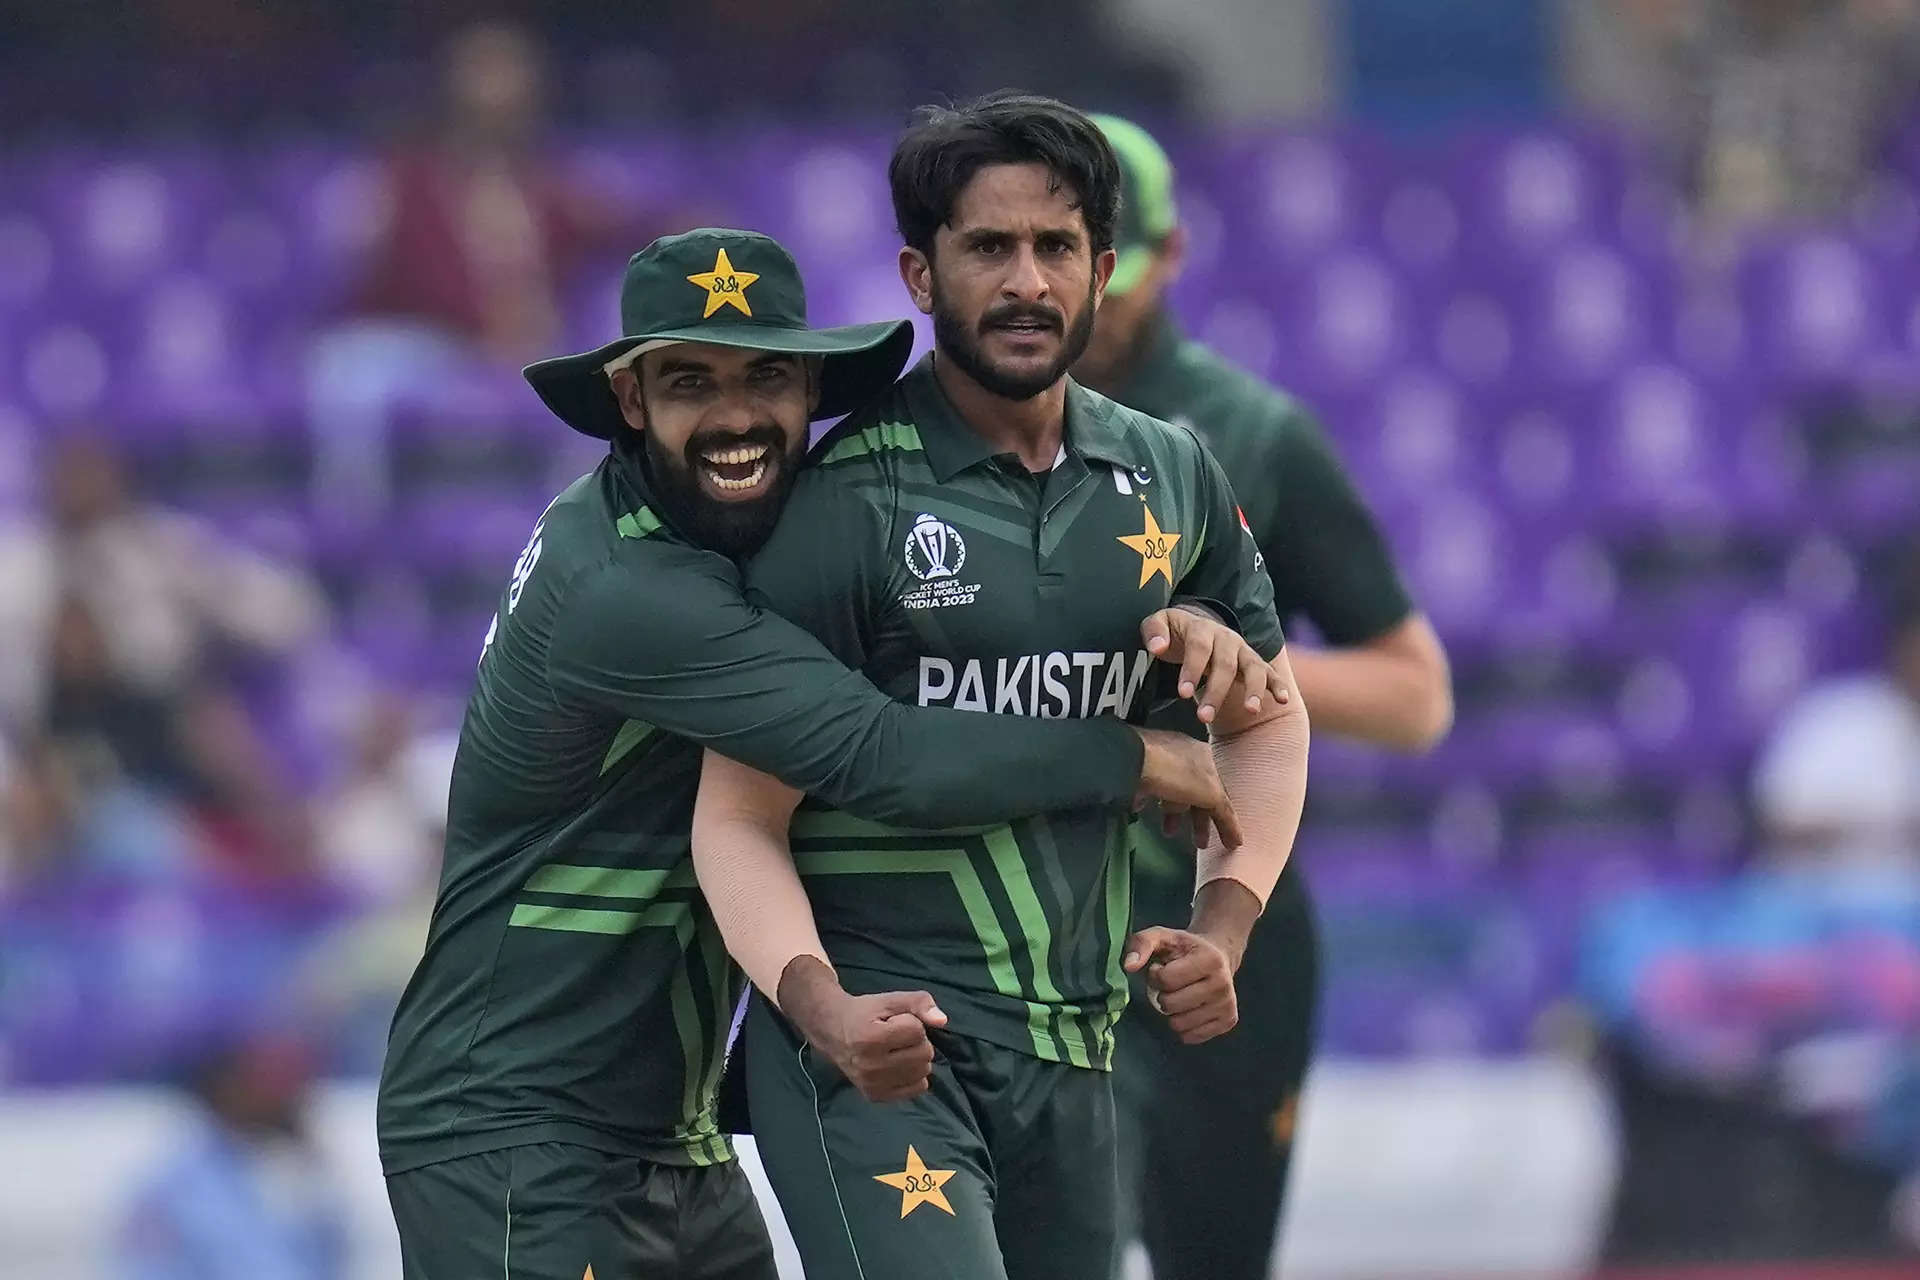 Pressure on India in much-awaited World Cup clash, says Hasan Ali